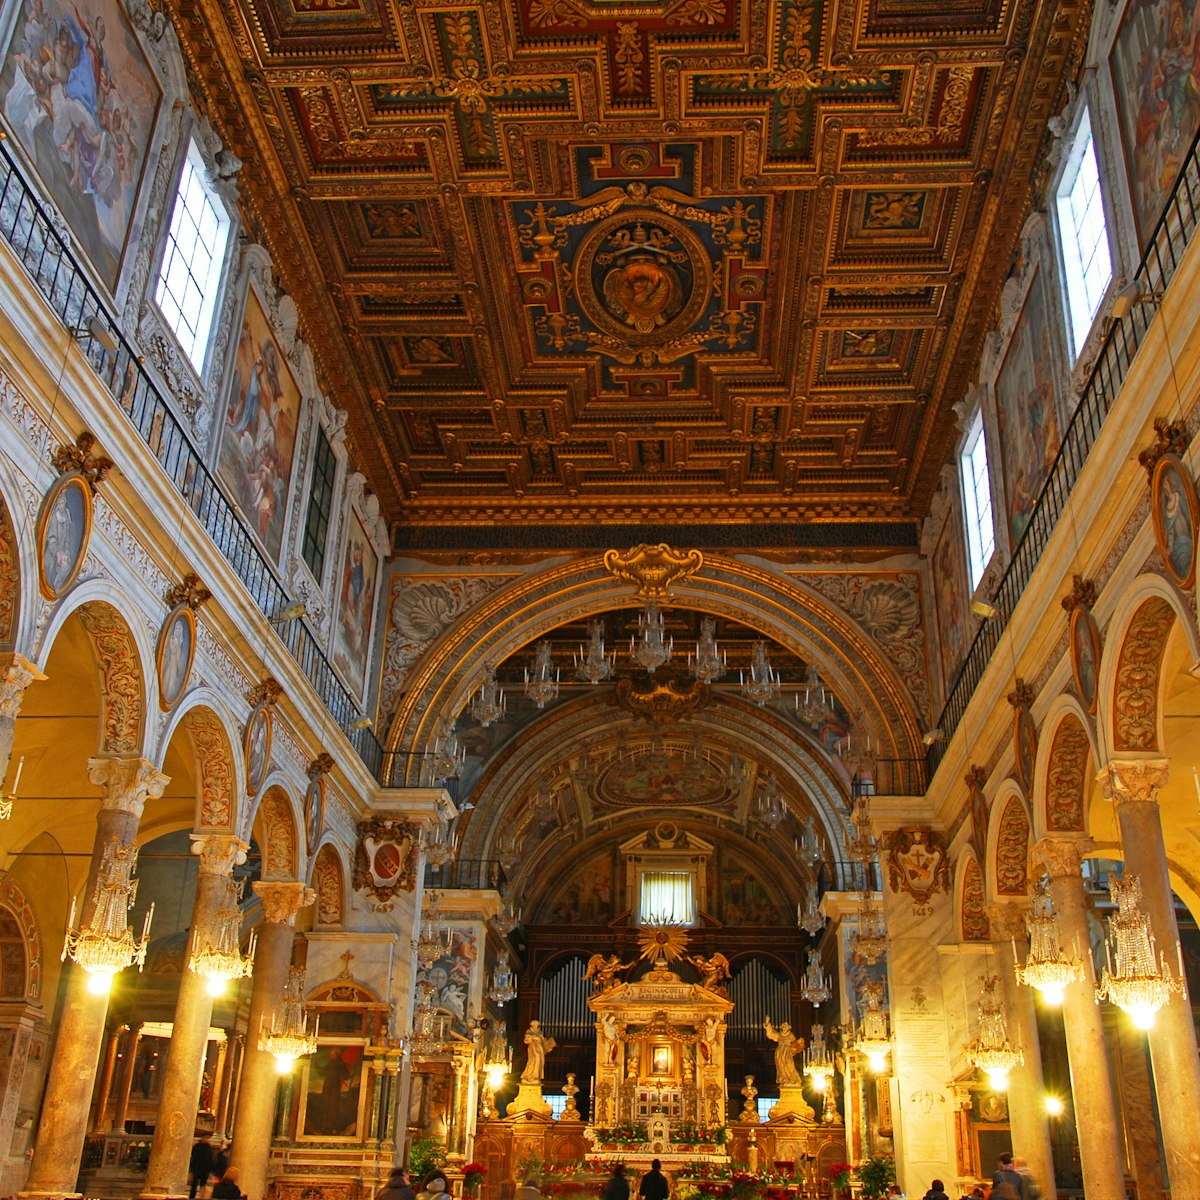 Rome  Santa Maria in Aracoeli  Basilica interior at the Vittoriano; Shutterstock ID 98175971; Your name (First / Last): Josh Vogel; Project no. or GL code: 56530; Network activity no. or Cost Centre: Online-Design; Product or Project: 65050/7529/Josh Vogel/LP.com Destination Galleries